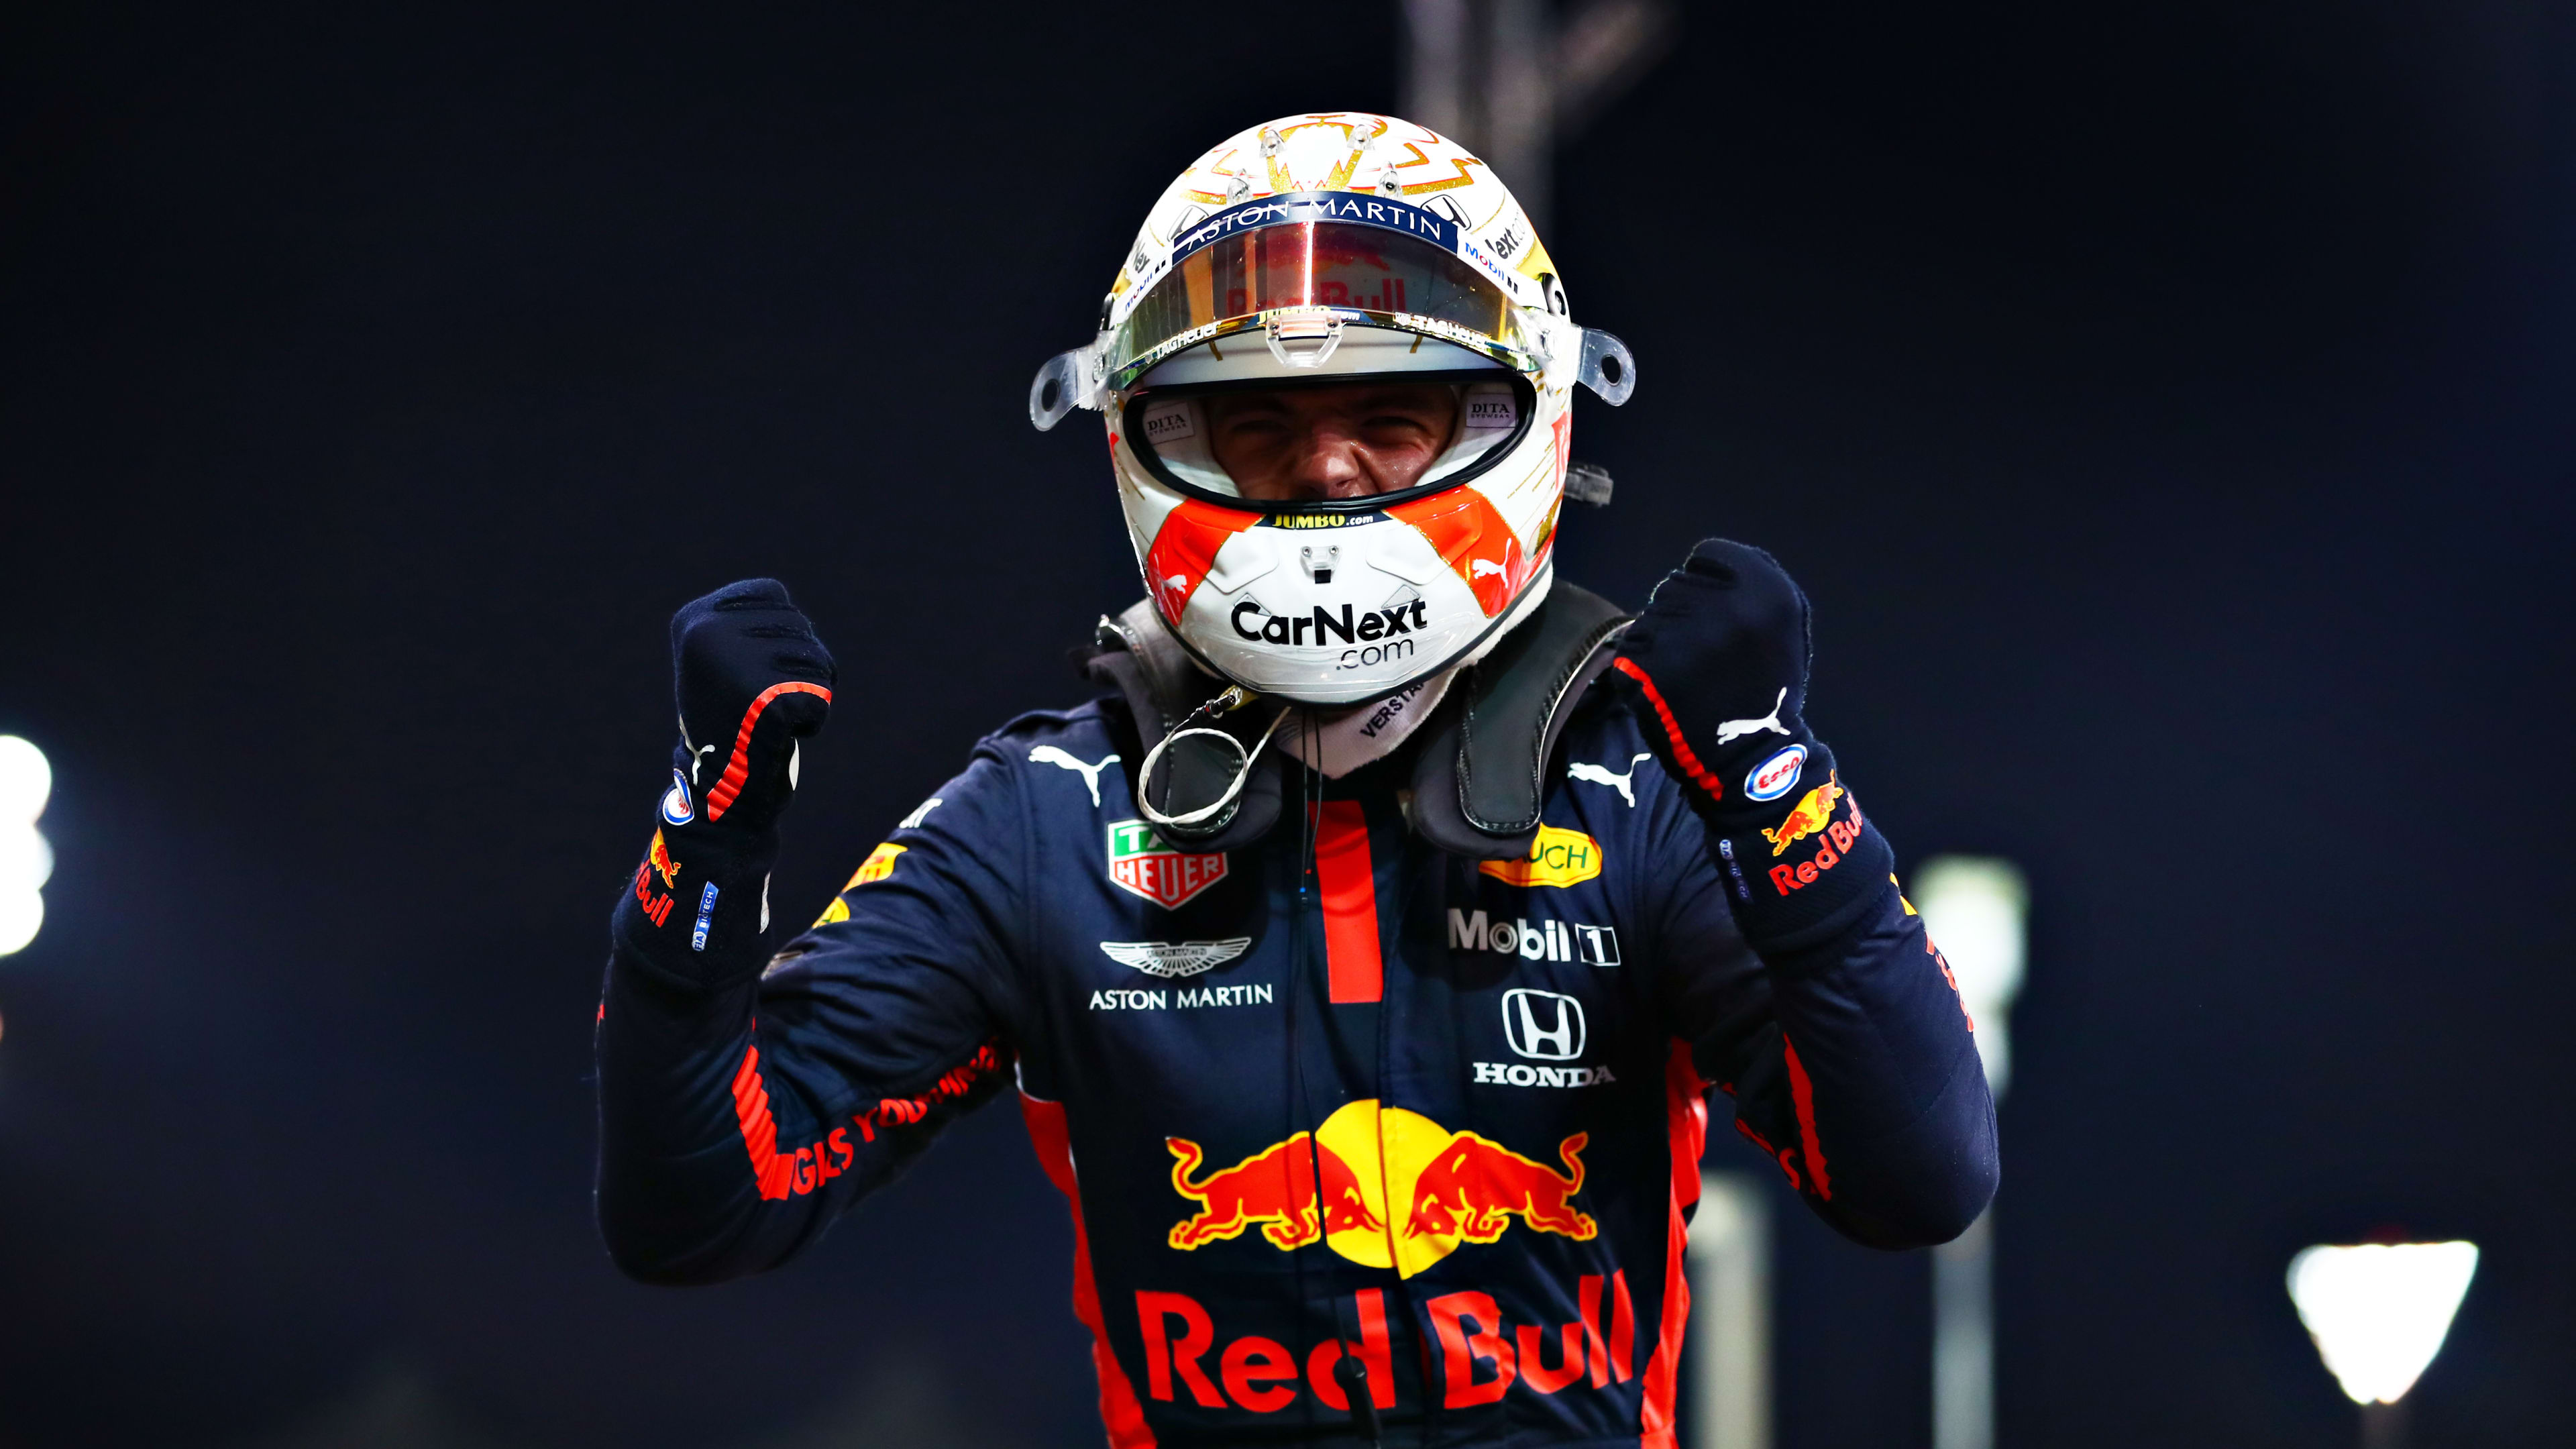 Abu Dhabi Grand Prix Qualifying Report Max Verstappen Stuns Mercedes By Taking First Pole Of The Season At Yas Marina Formula 1